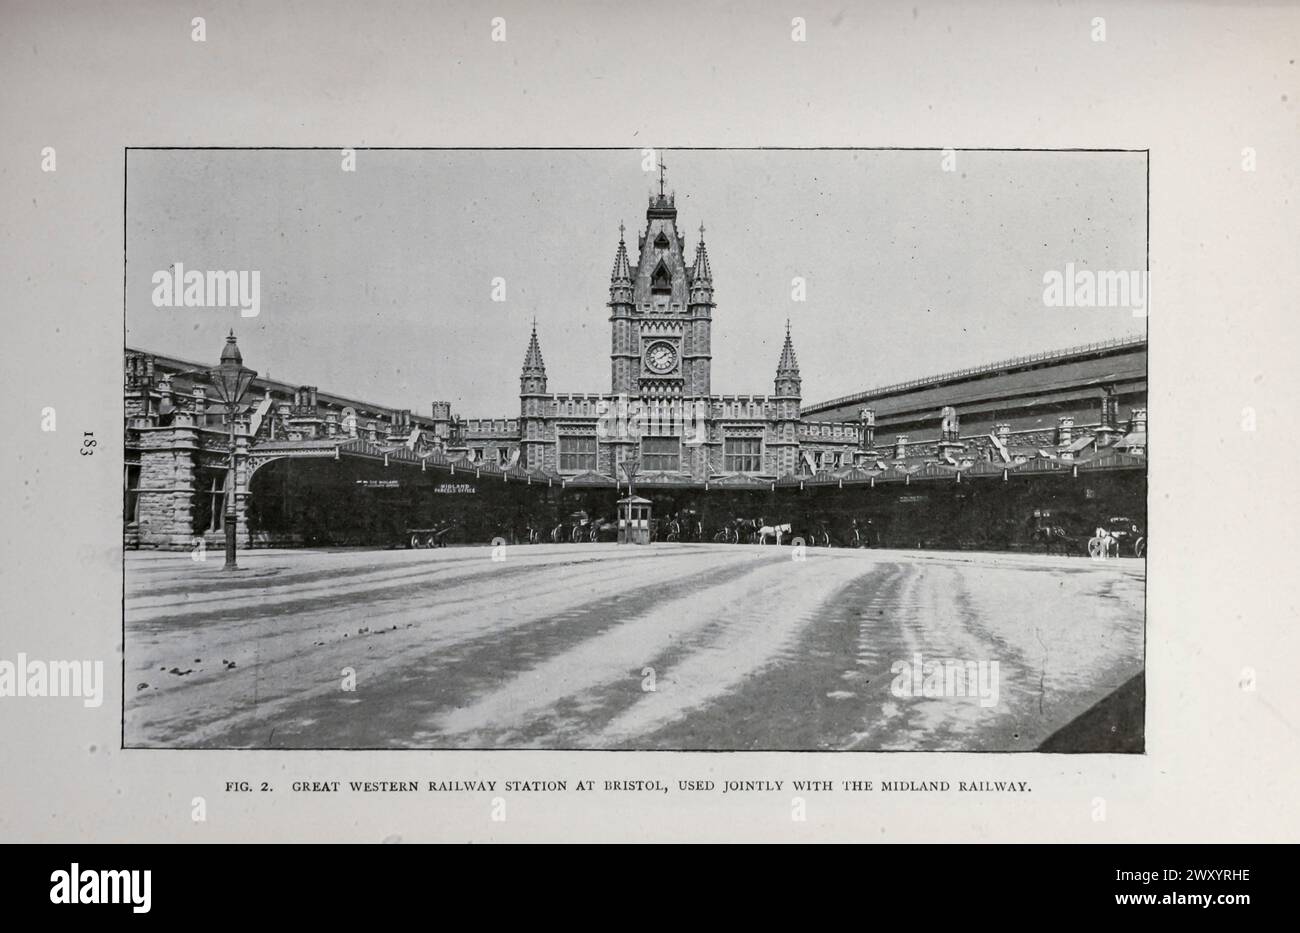 Great Western Railway station at Bristol, used jointly with the Midland Railway from the Article GREAT RAILWAY STATIONS OF ENGLAND. By Thomas Cargill. from The Engineering Magazine Devoted to Industrial Progress Volume XVI October 1898 - March 1899 The Engineering Magazine Co Stock Photo